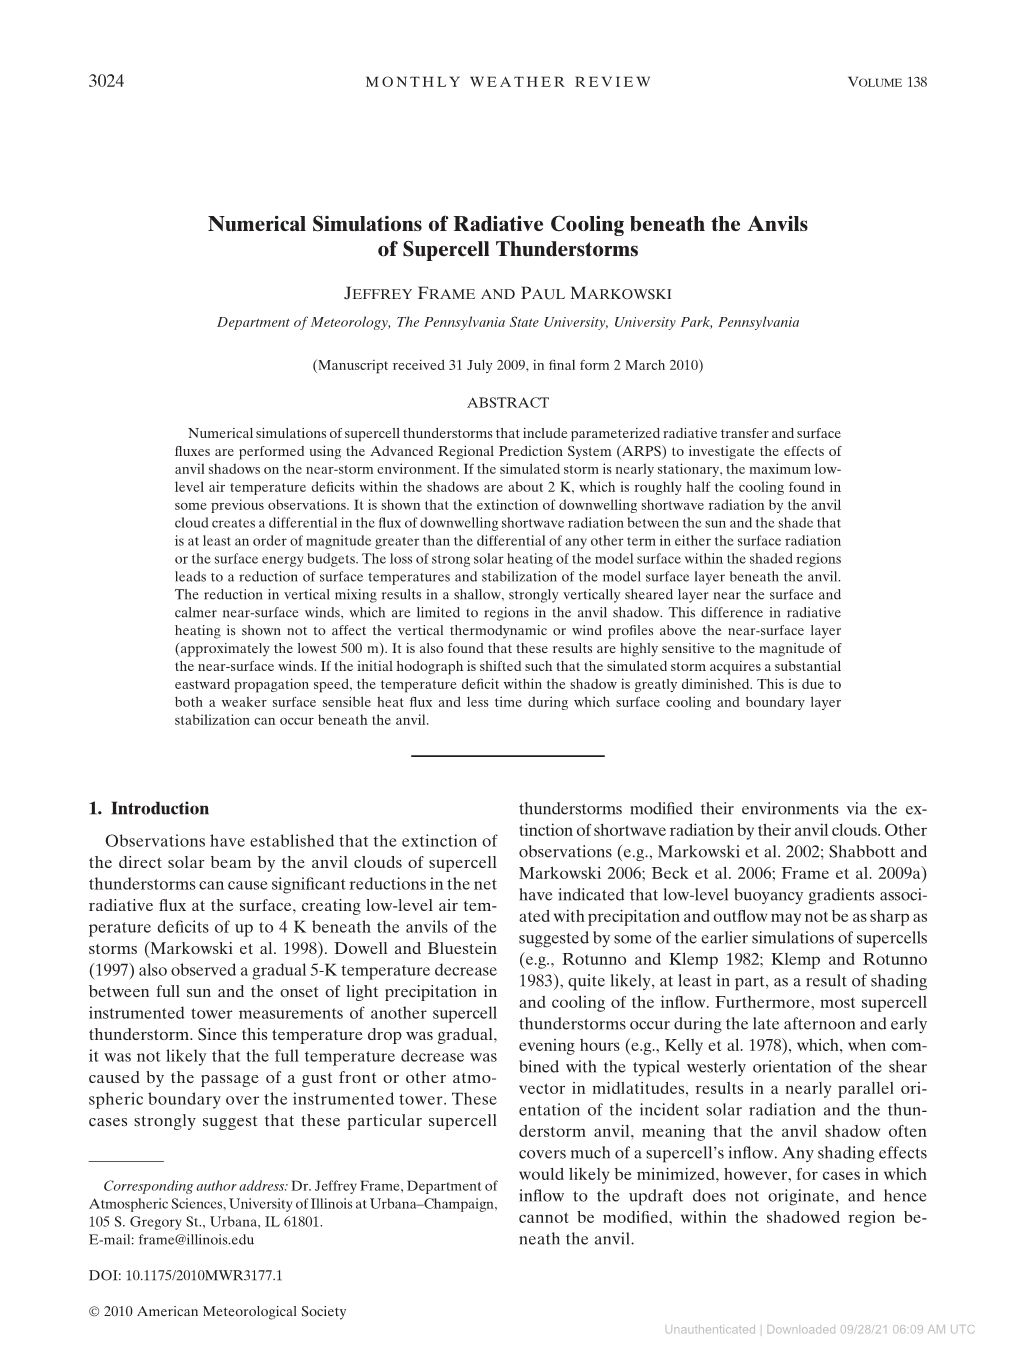 Numerical Simulations of Radiative Cooling Beneath the Anvils of Supercell Thunderstorms